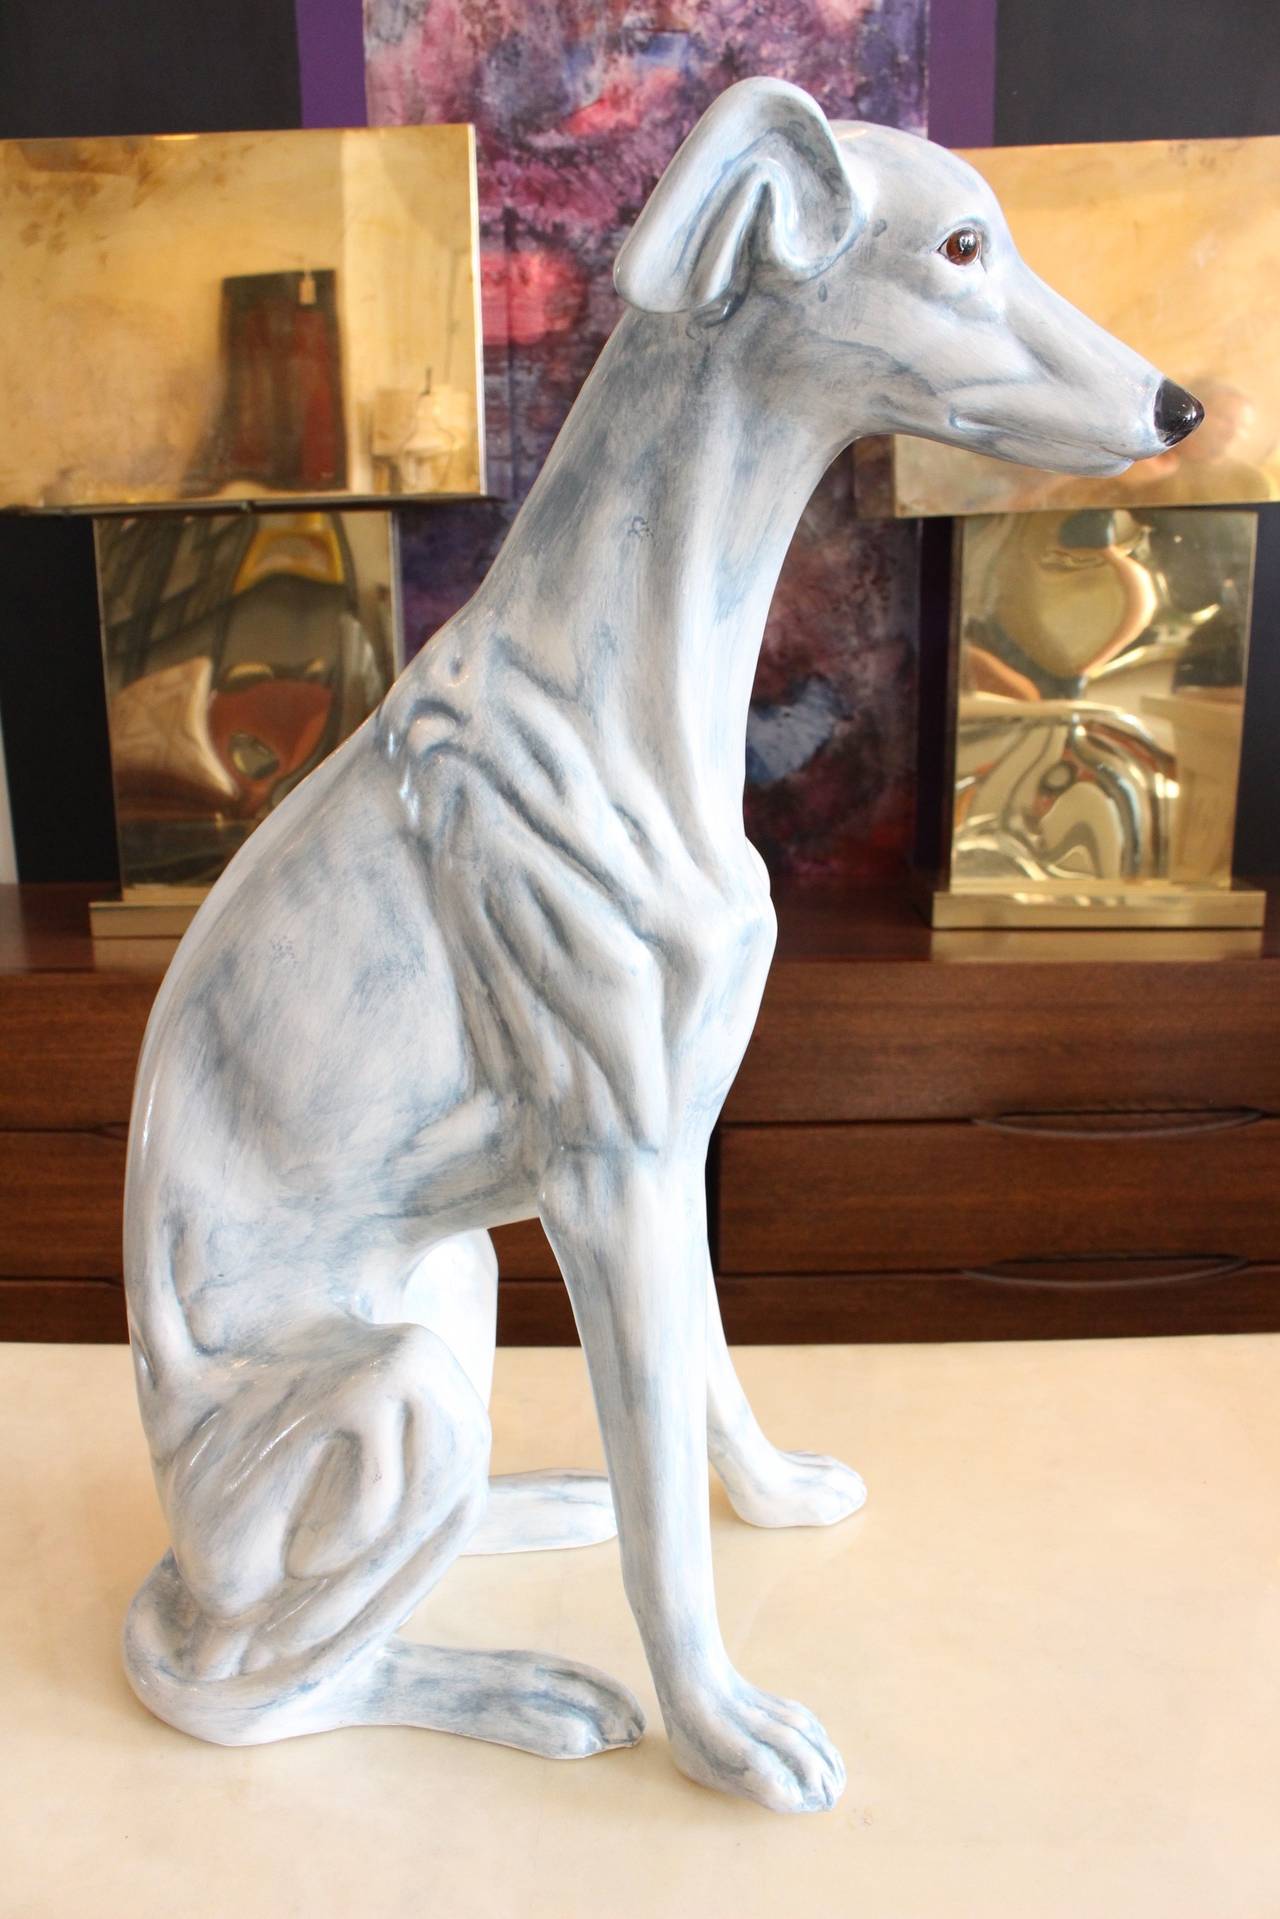 Porcelain whippet or greyhound with a light blue glaze, circa 1970s.

Dimensions: 14